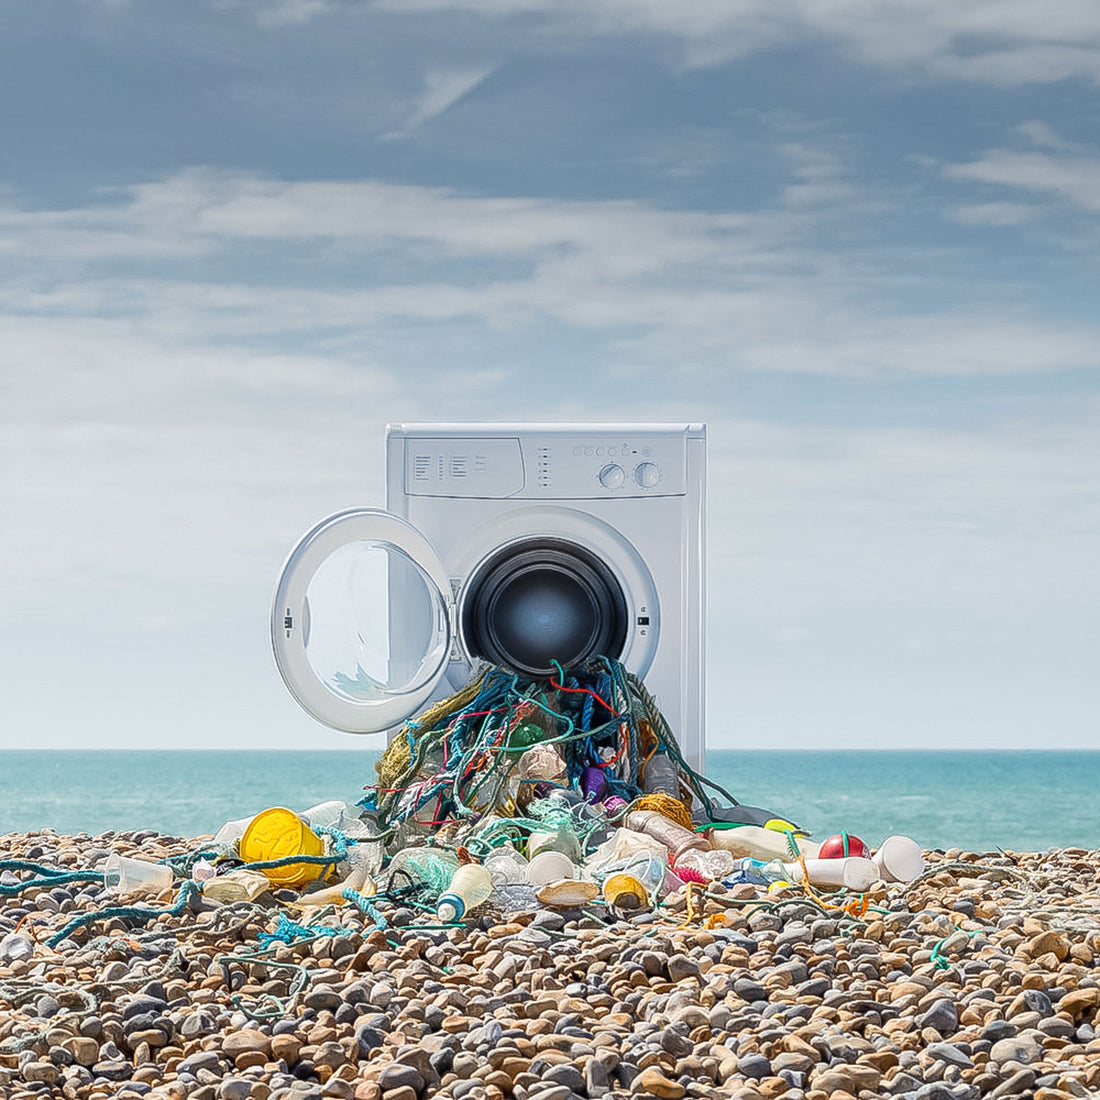 A washing machine on a pebble beach with plastic bottles and nets spilling out of the drum: an artistic interpretation of plastic pollution in our oceans